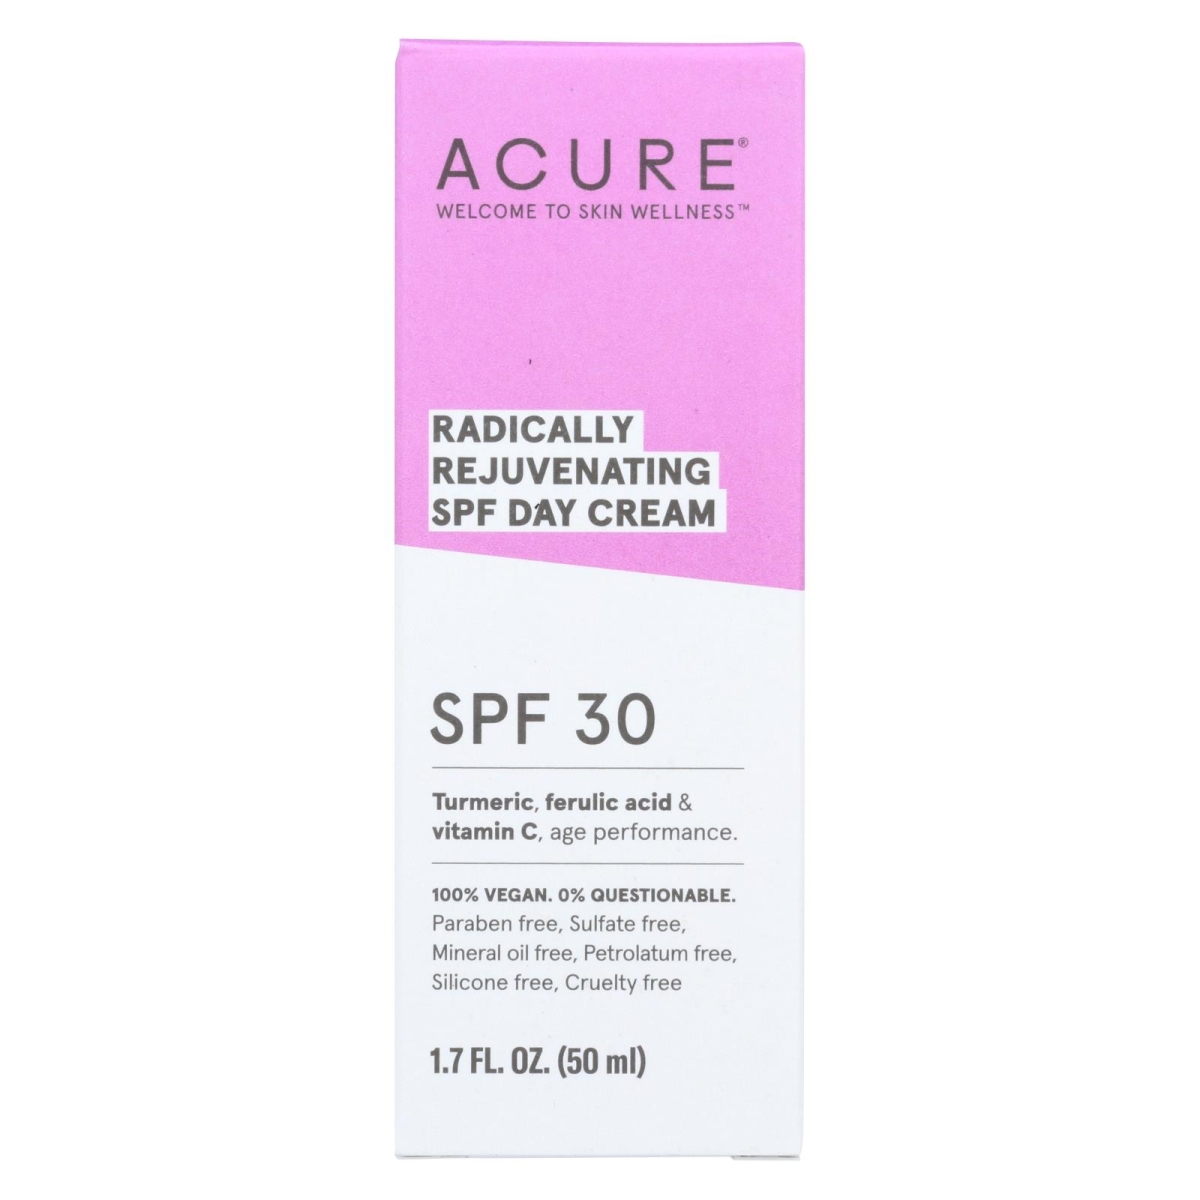 Picture of Acure 2344232 1.7 fl oz SPF 30 Day Cream Radically Rejuvenating